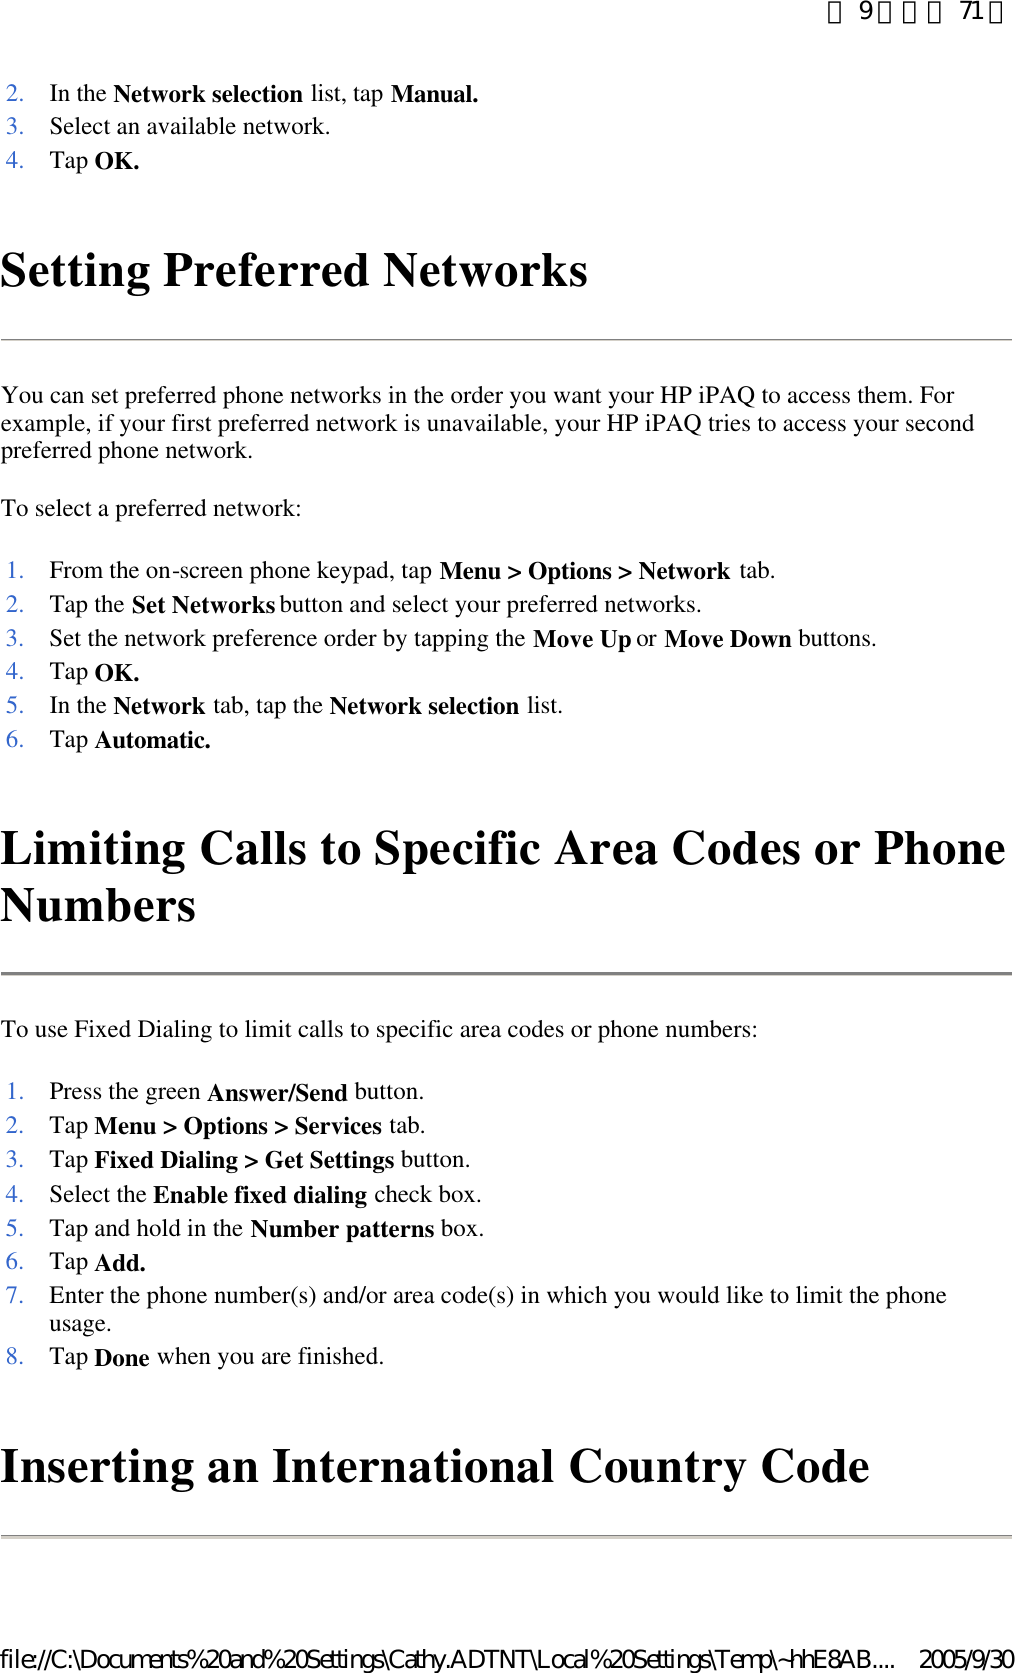 Setting Preferred Networks  You can set preferred phone networks in the order you want your HP iPAQ to access them. For example, if your first preferred network is unavailable, your HP iPAQ tries to access your second preferred phone network.  To select a preferred network: Limiting Calls to Specific Area Codes or Phone Numbers  To use Fixed Dialing to limit calls to specific area codes or phone numbers:  Inserting an International Country Code  2. In the Network selection list, tap Manual.3. Select an available network.4. Tap OK.1. From the on-screen phone keypad, tap Menu &gt; Options &gt; Network tab. 2. Tap the Set Networks button and select your preferred networks. 3. Set the network preference order by tapping the Move Up or Move Down buttons. 4. Tap OK.5. In the Network tab, tap the Network selection list. 6. Tap Automatic.1. Press the green Answer/Send button. 2. Tap Menu &gt; Options &gt; Services tab. 3. Tap Fixed Dialing &gt; Get Settings button. 4. Select the Enable fixed dialing check box. 5. Tap and hold in the Number patterns box. 6. Tap Add.7. Enter the phone number(s) and/or area code(s) in which you would like to limit the phone usage. 8. Tap Done when you are finished. 第 9 頁，共 71 頁2005/9/30file://C:\Documents%20and%20Settings\Cathy.ADTNT\Local%20Settings\Temp\~hhE8AB....